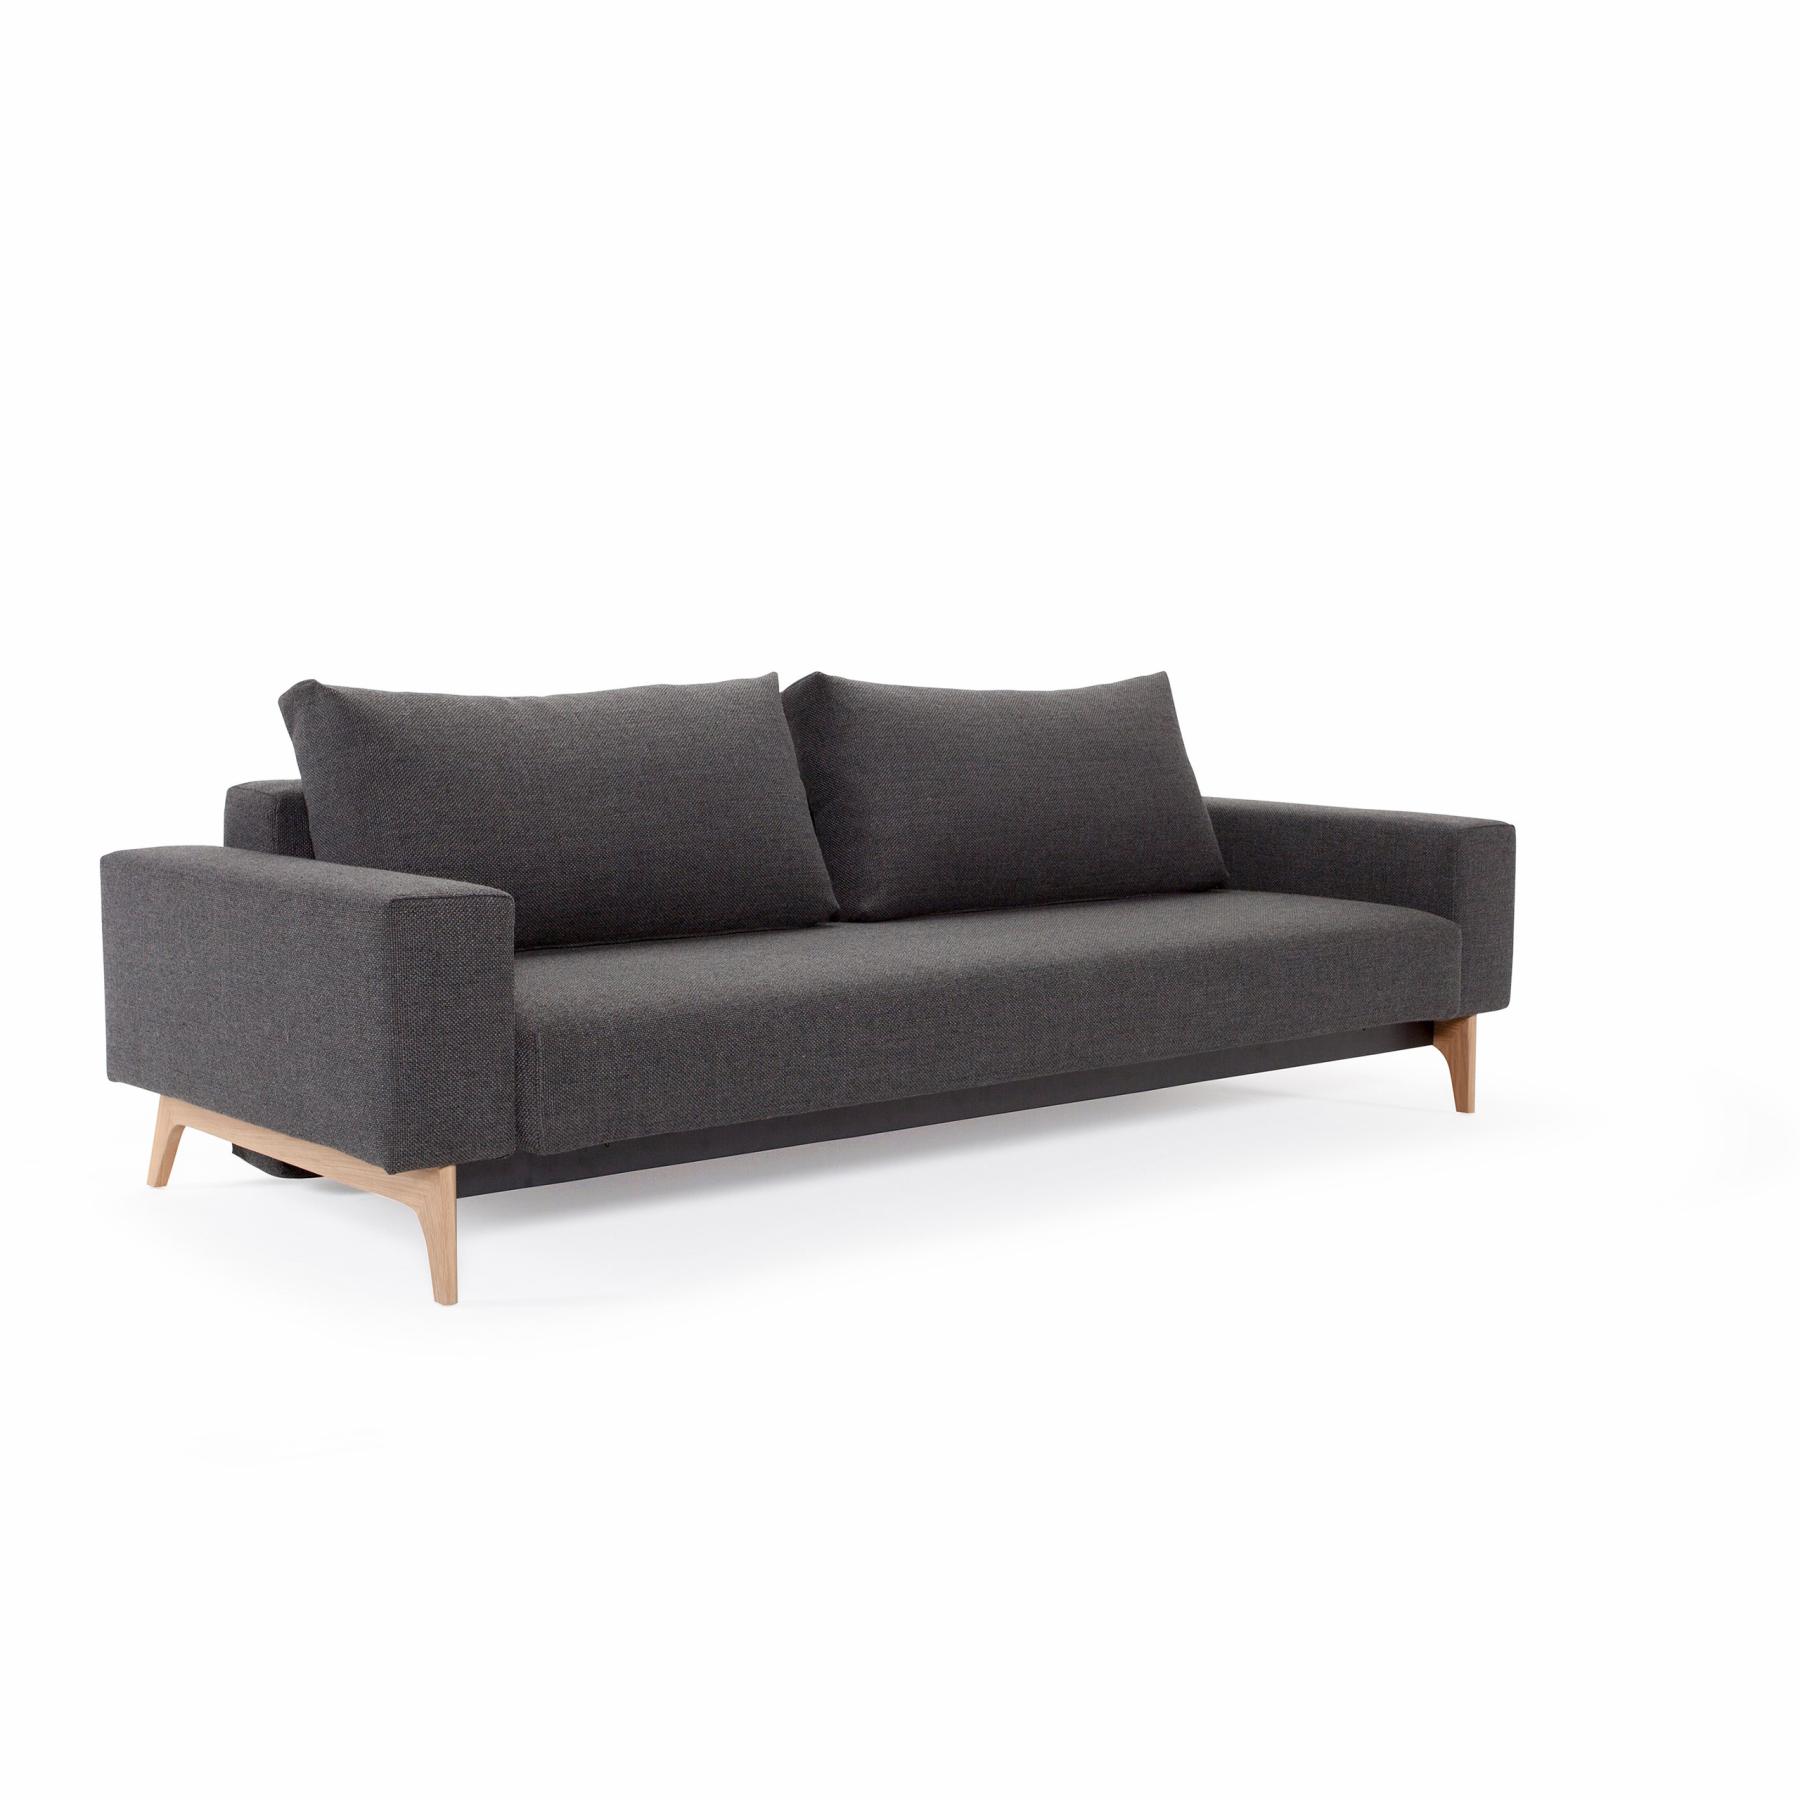 Genveje forening stole Idun Sofa Bed